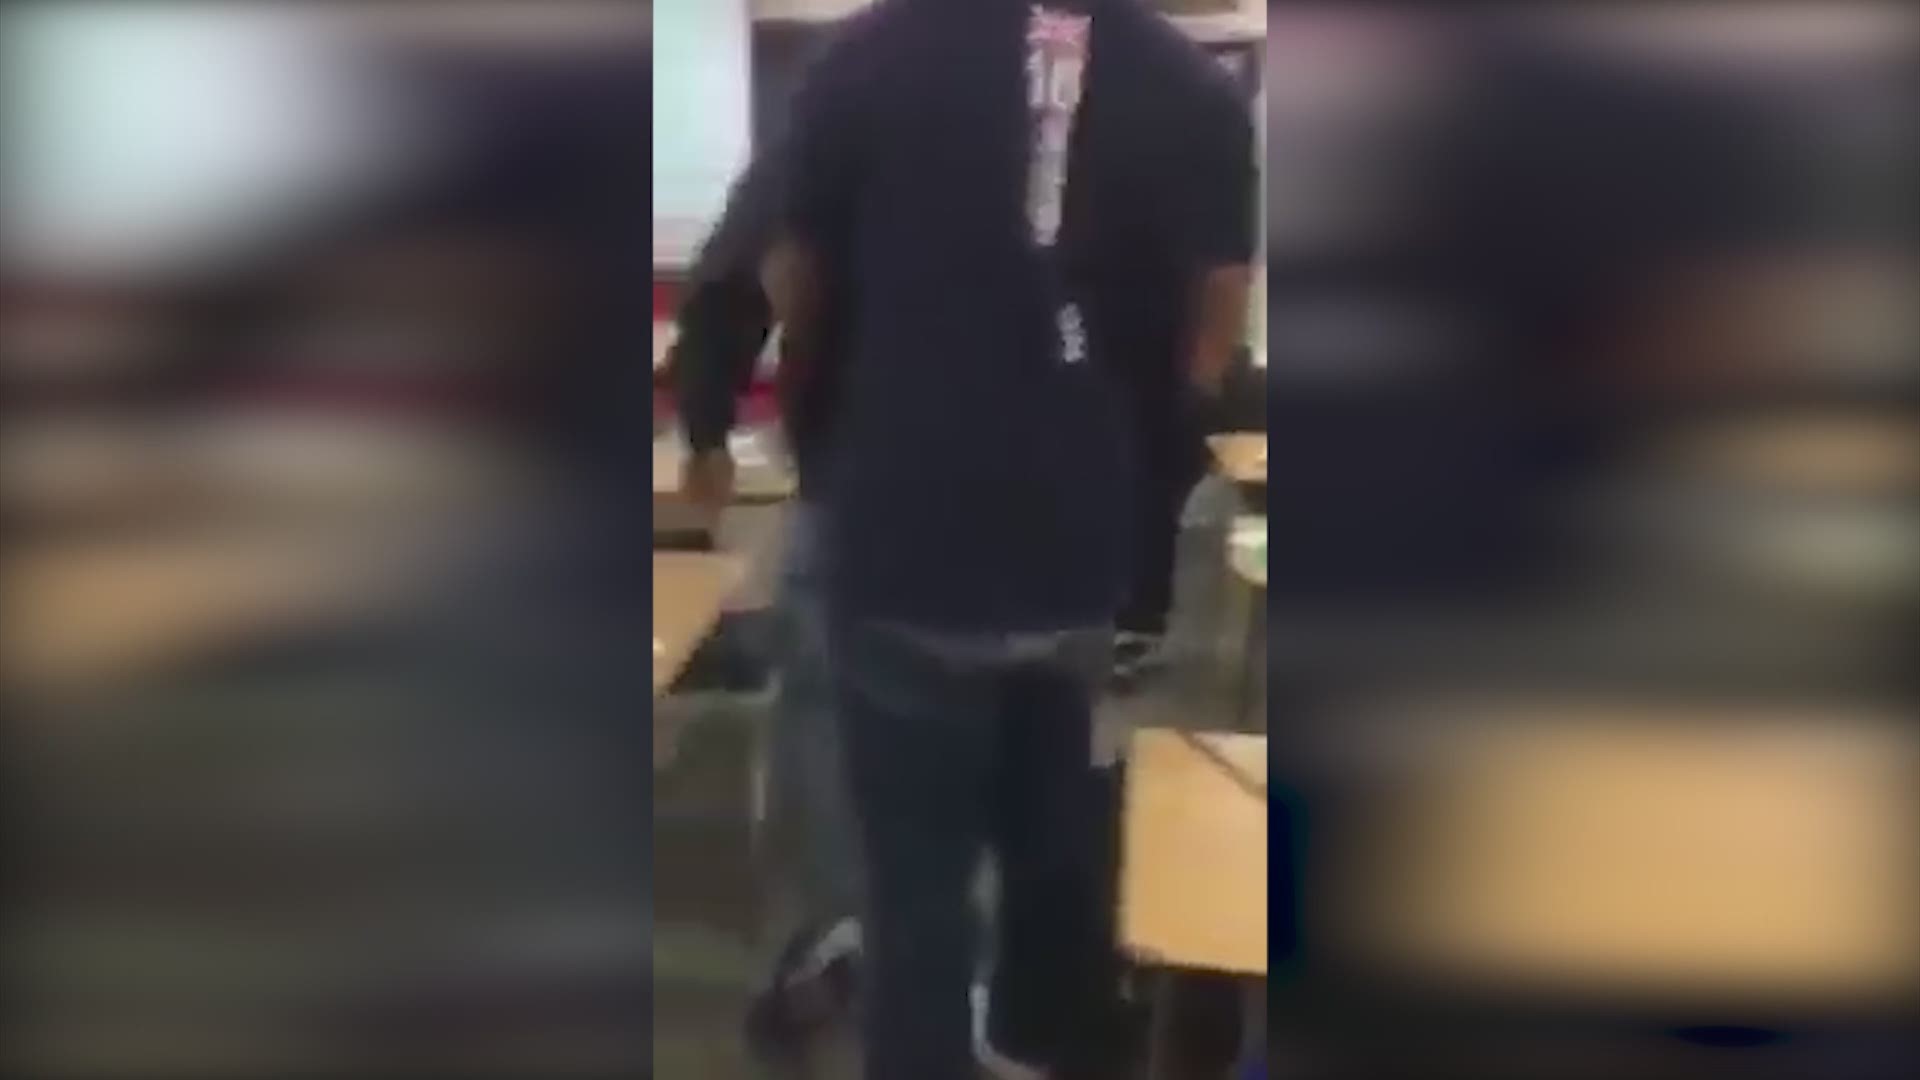 Authorities are investigating after a Spring ISD student allegedly shoved a teacher in an incident caught on video.